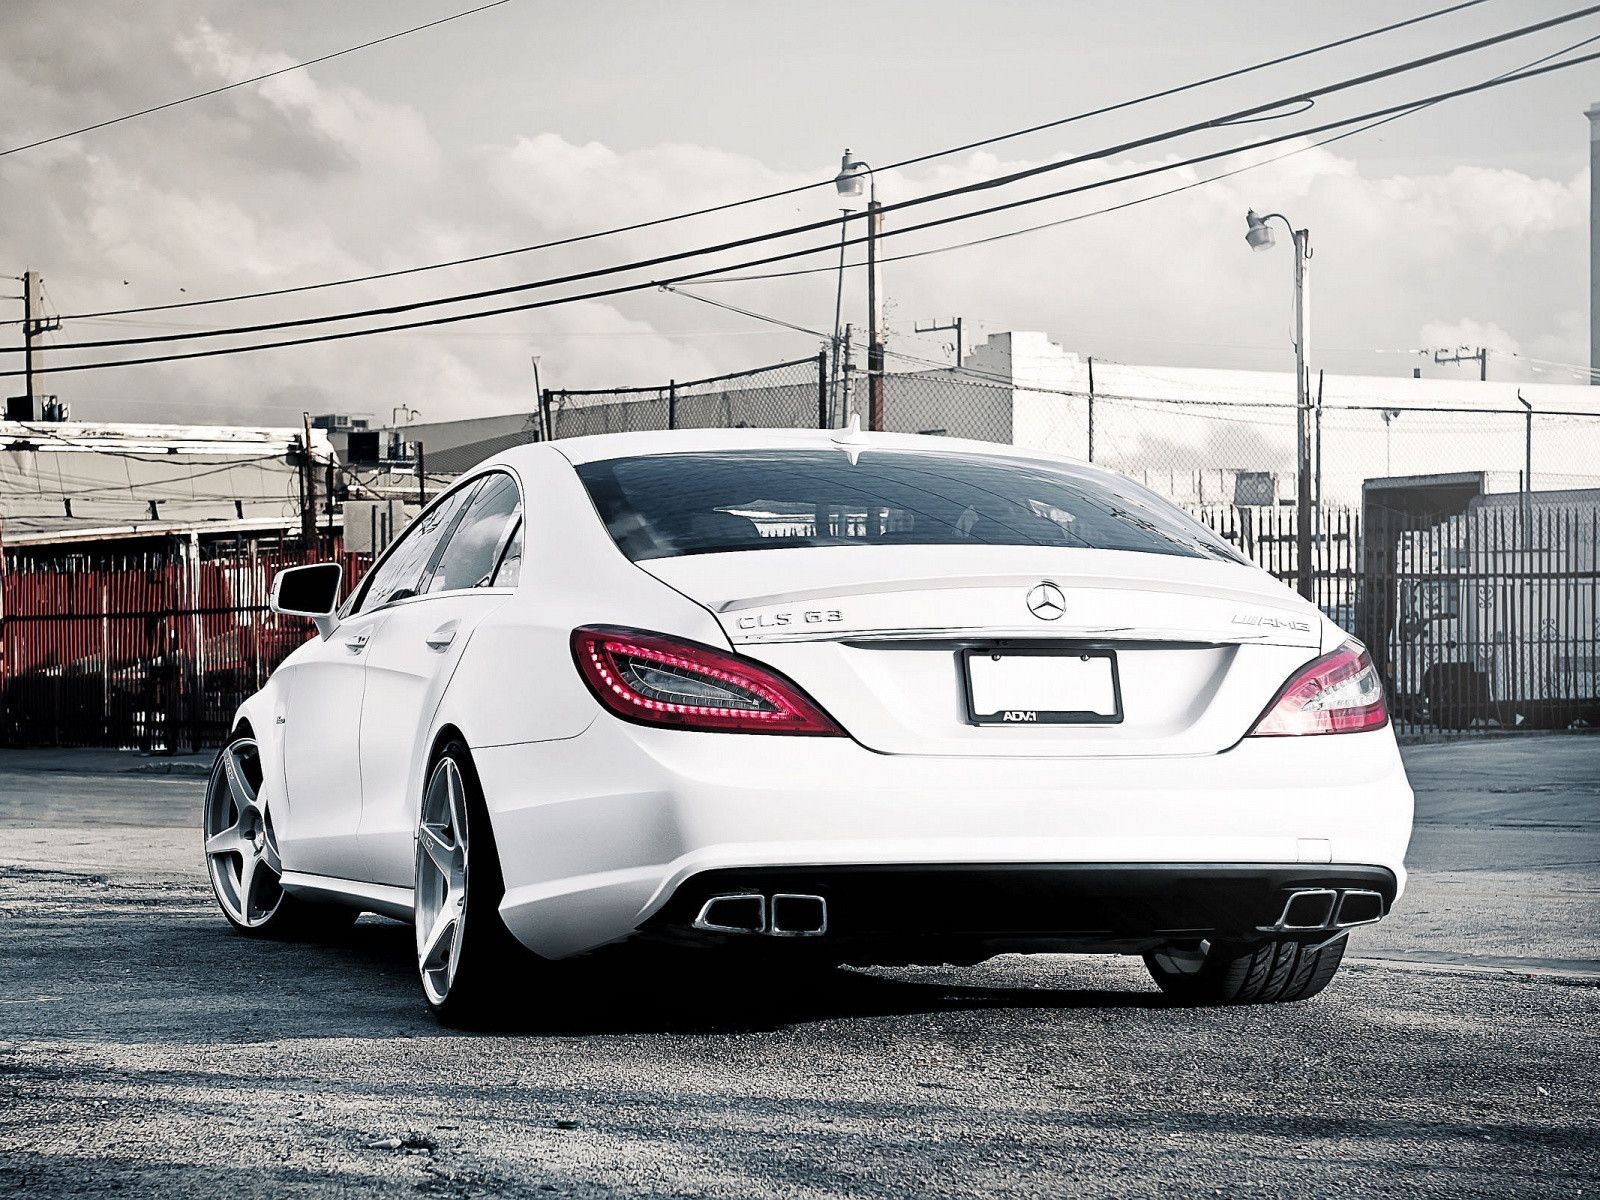 Free Mercedes Amg Wallpaper Hd Wallpapers Apple Tablet - White Mercedes Benz Cls 63 Amg - HD Wallpaper 